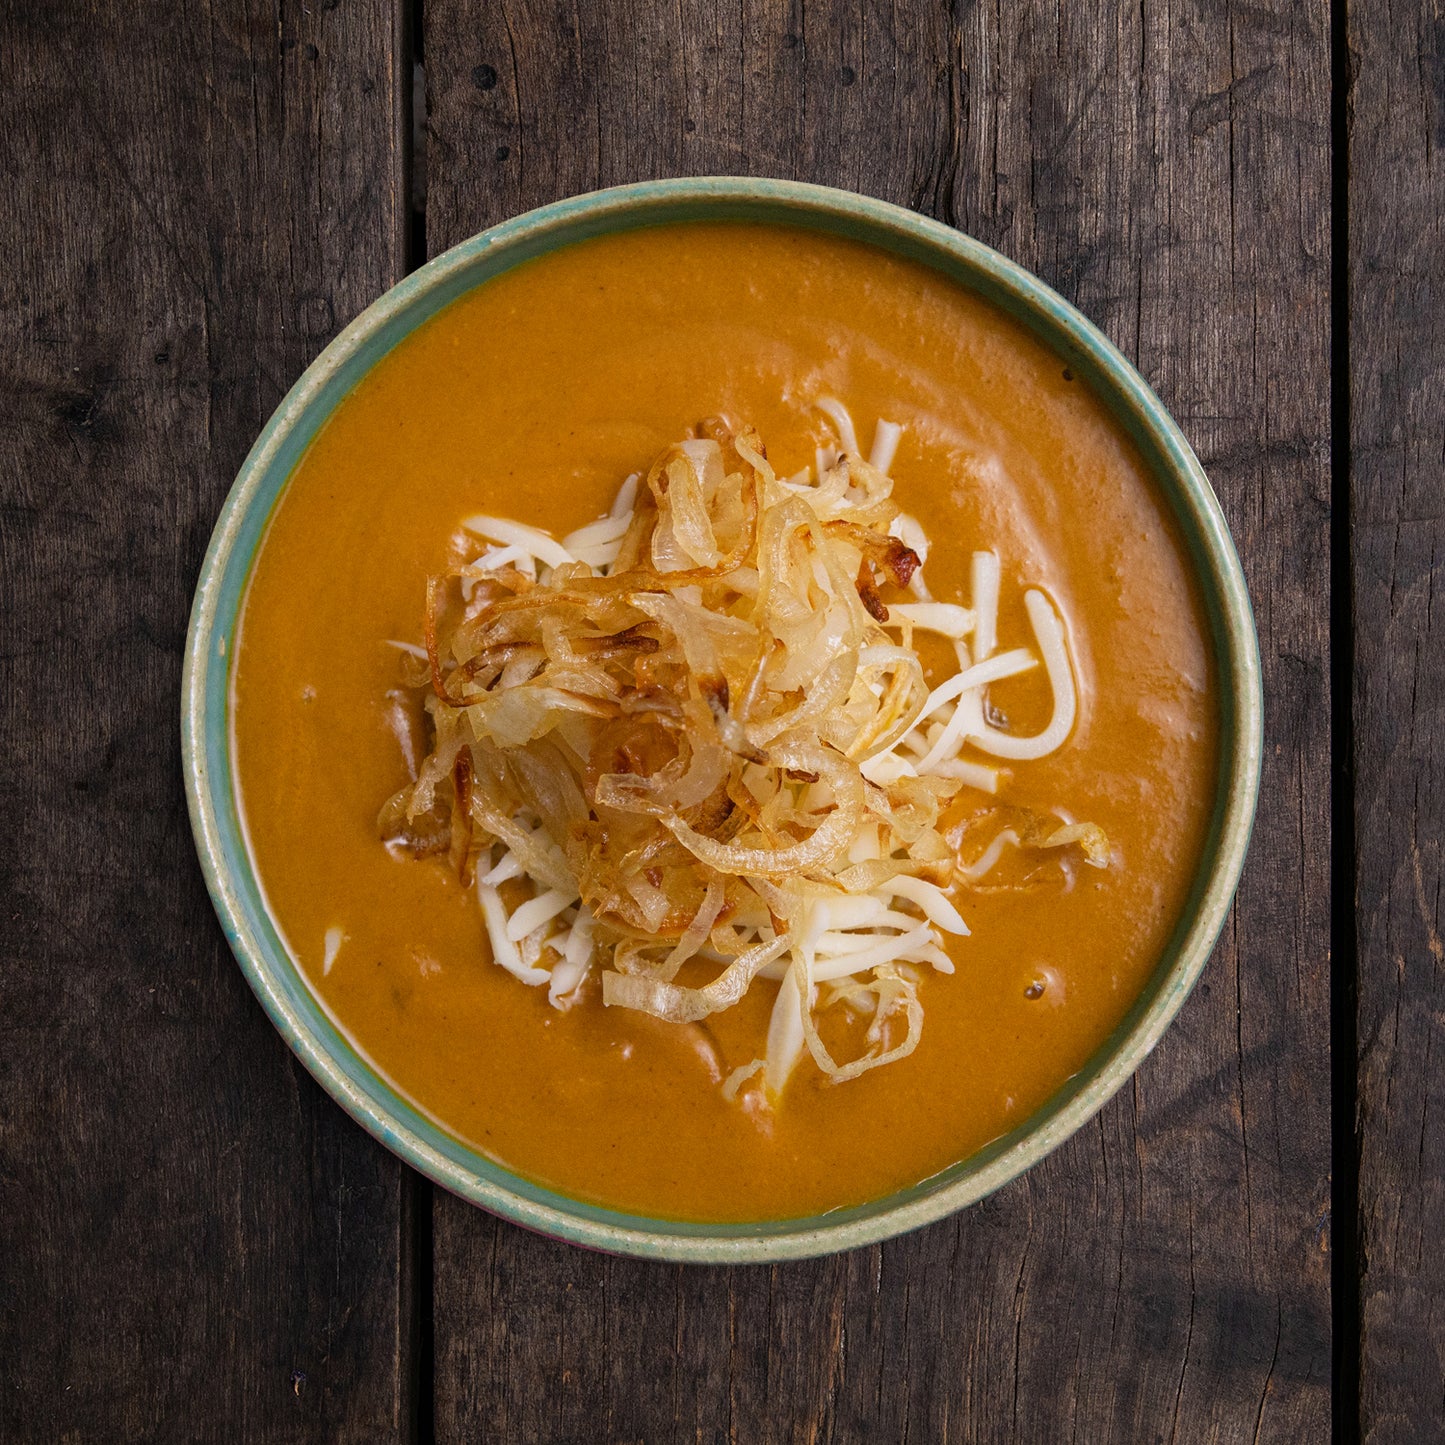 Decorated Butternut Squash Soup in Bowl - Eat Proper Good